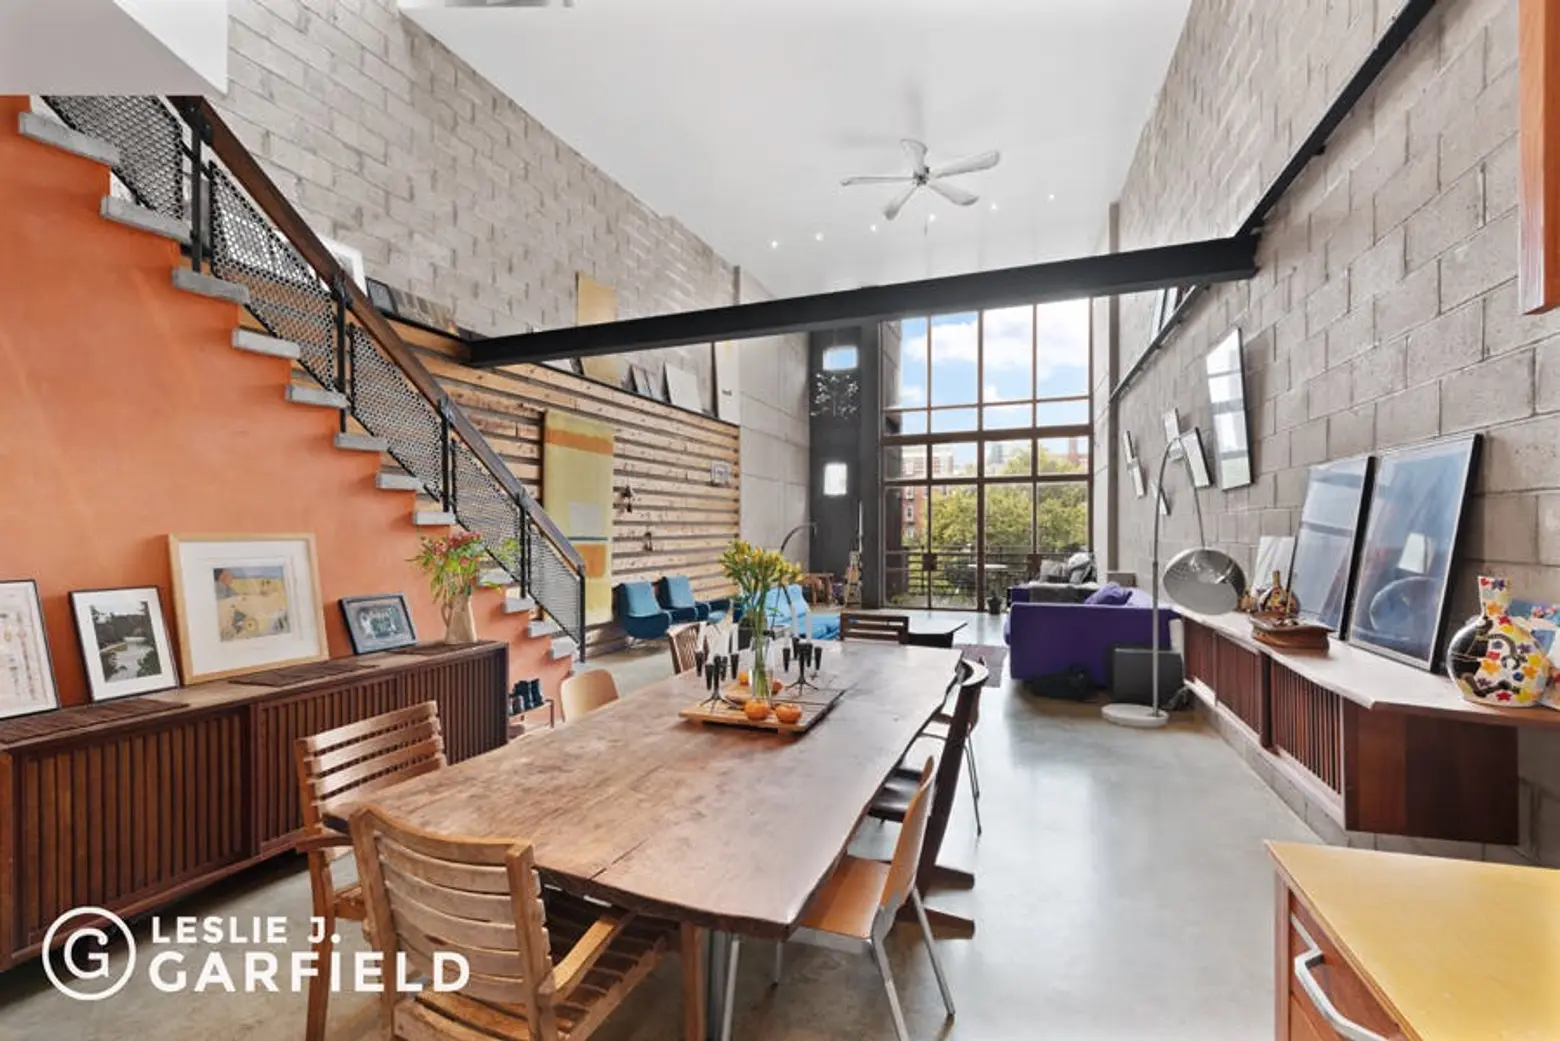 Colorful $13M East Village building could be the perfect modernist townhouse